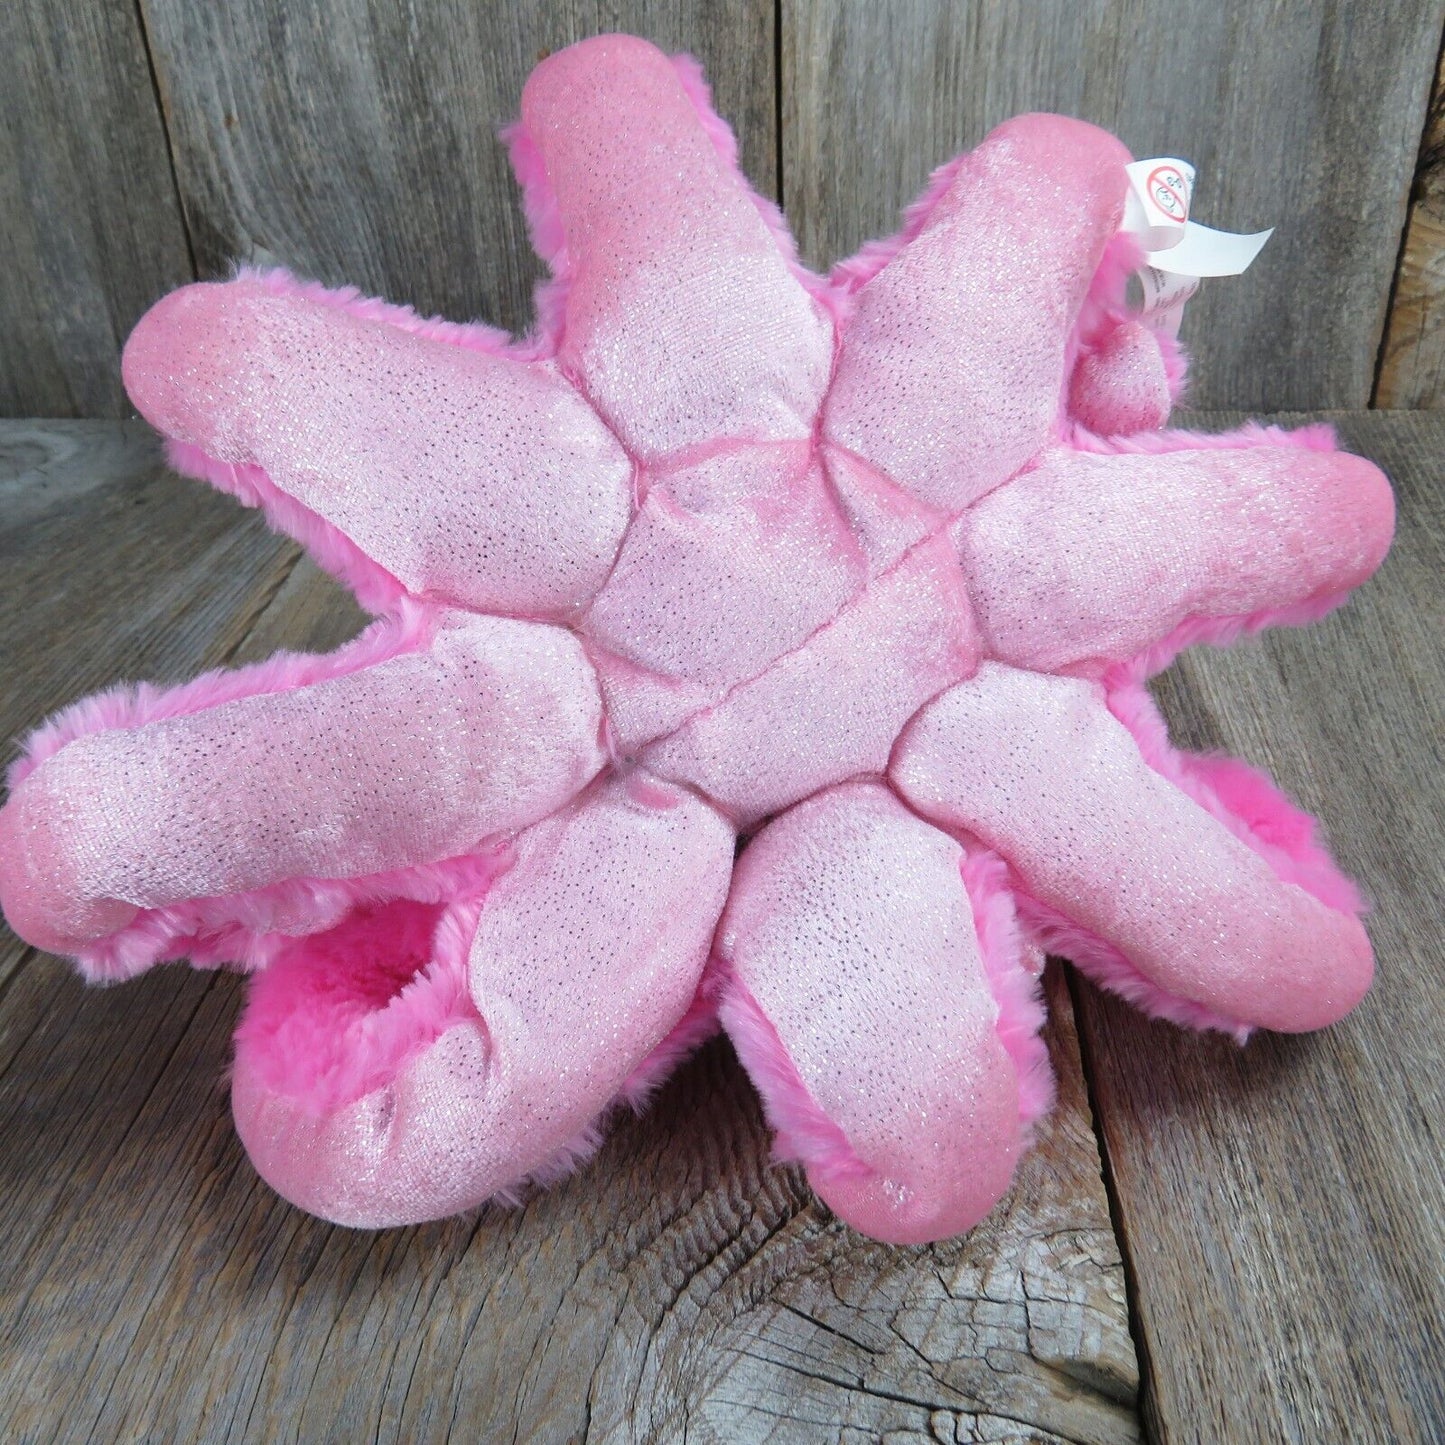 Pink Octopus Plush Eye Lashes Bow The Petting Zoo Sparkles Stuffed Animal 2018